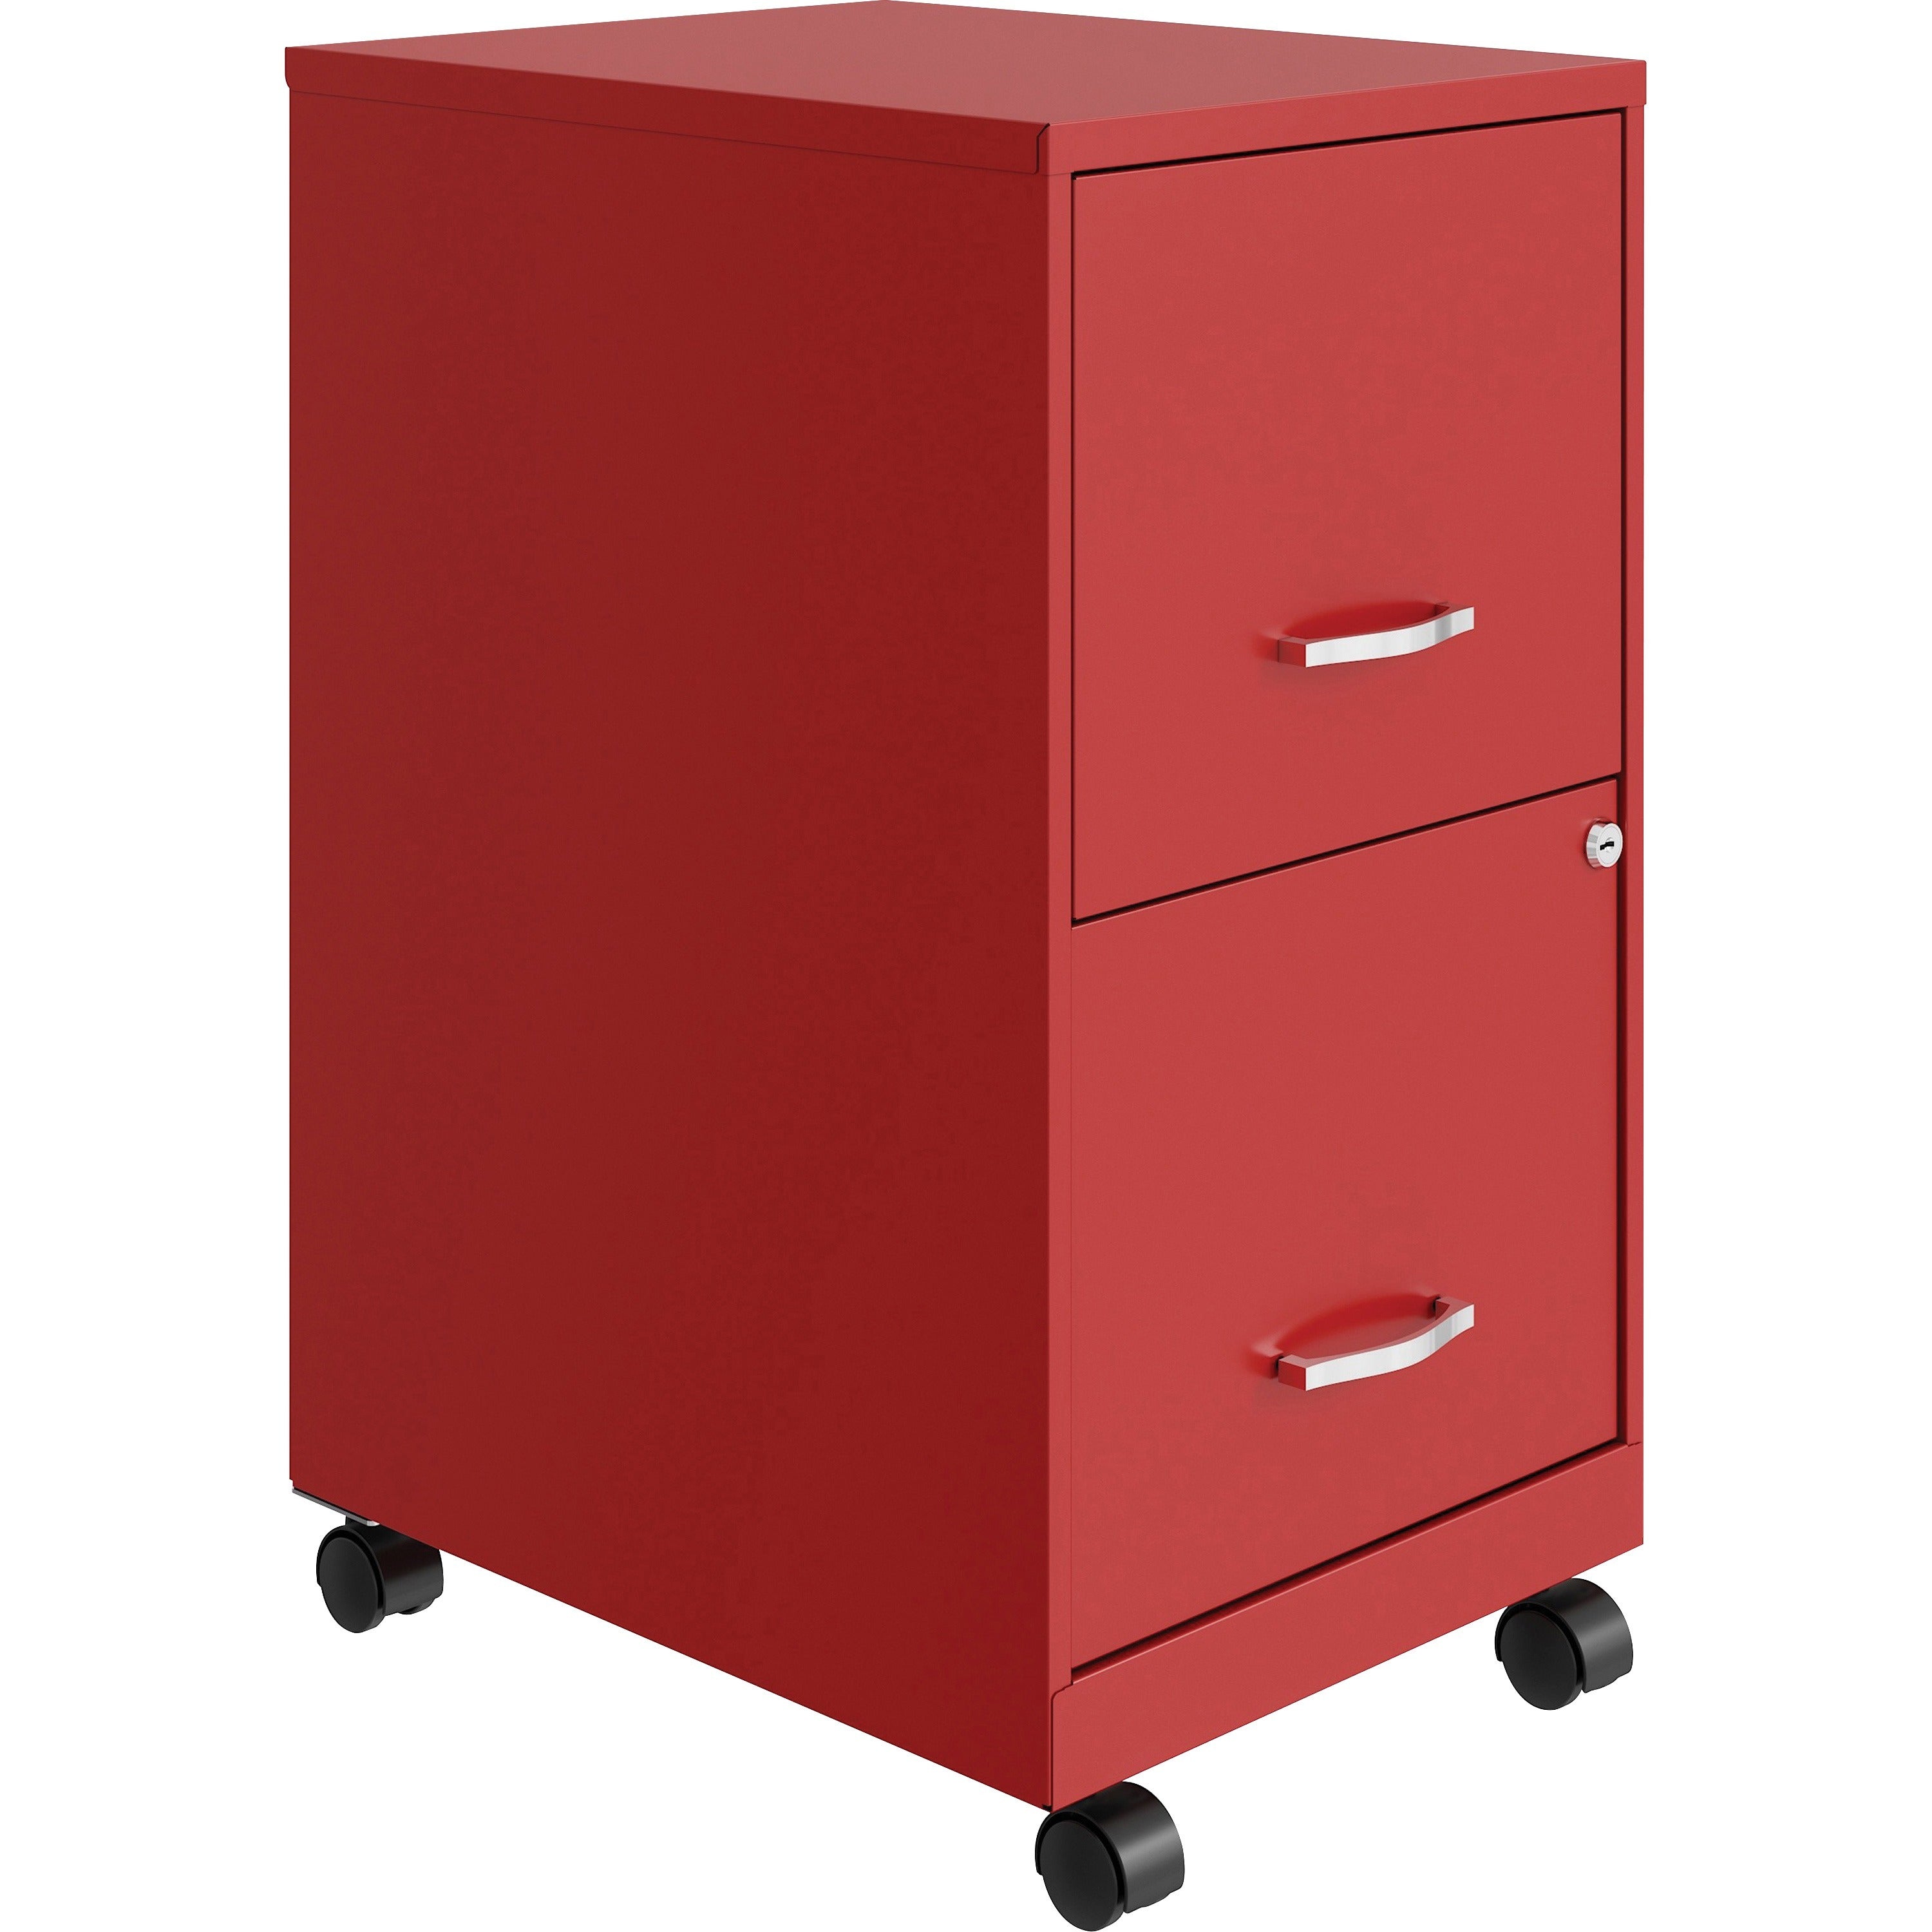 nusparc-mobile-file-cabinet-142-x-18-x-265-for-file-letter-mobility-locking-drawer-glide-suspension-3-4-drawer-extension-cam-lock-nonporous-surface-red-painted-steel-steel-recycled-assembly-required_nprvf218amrd - 1